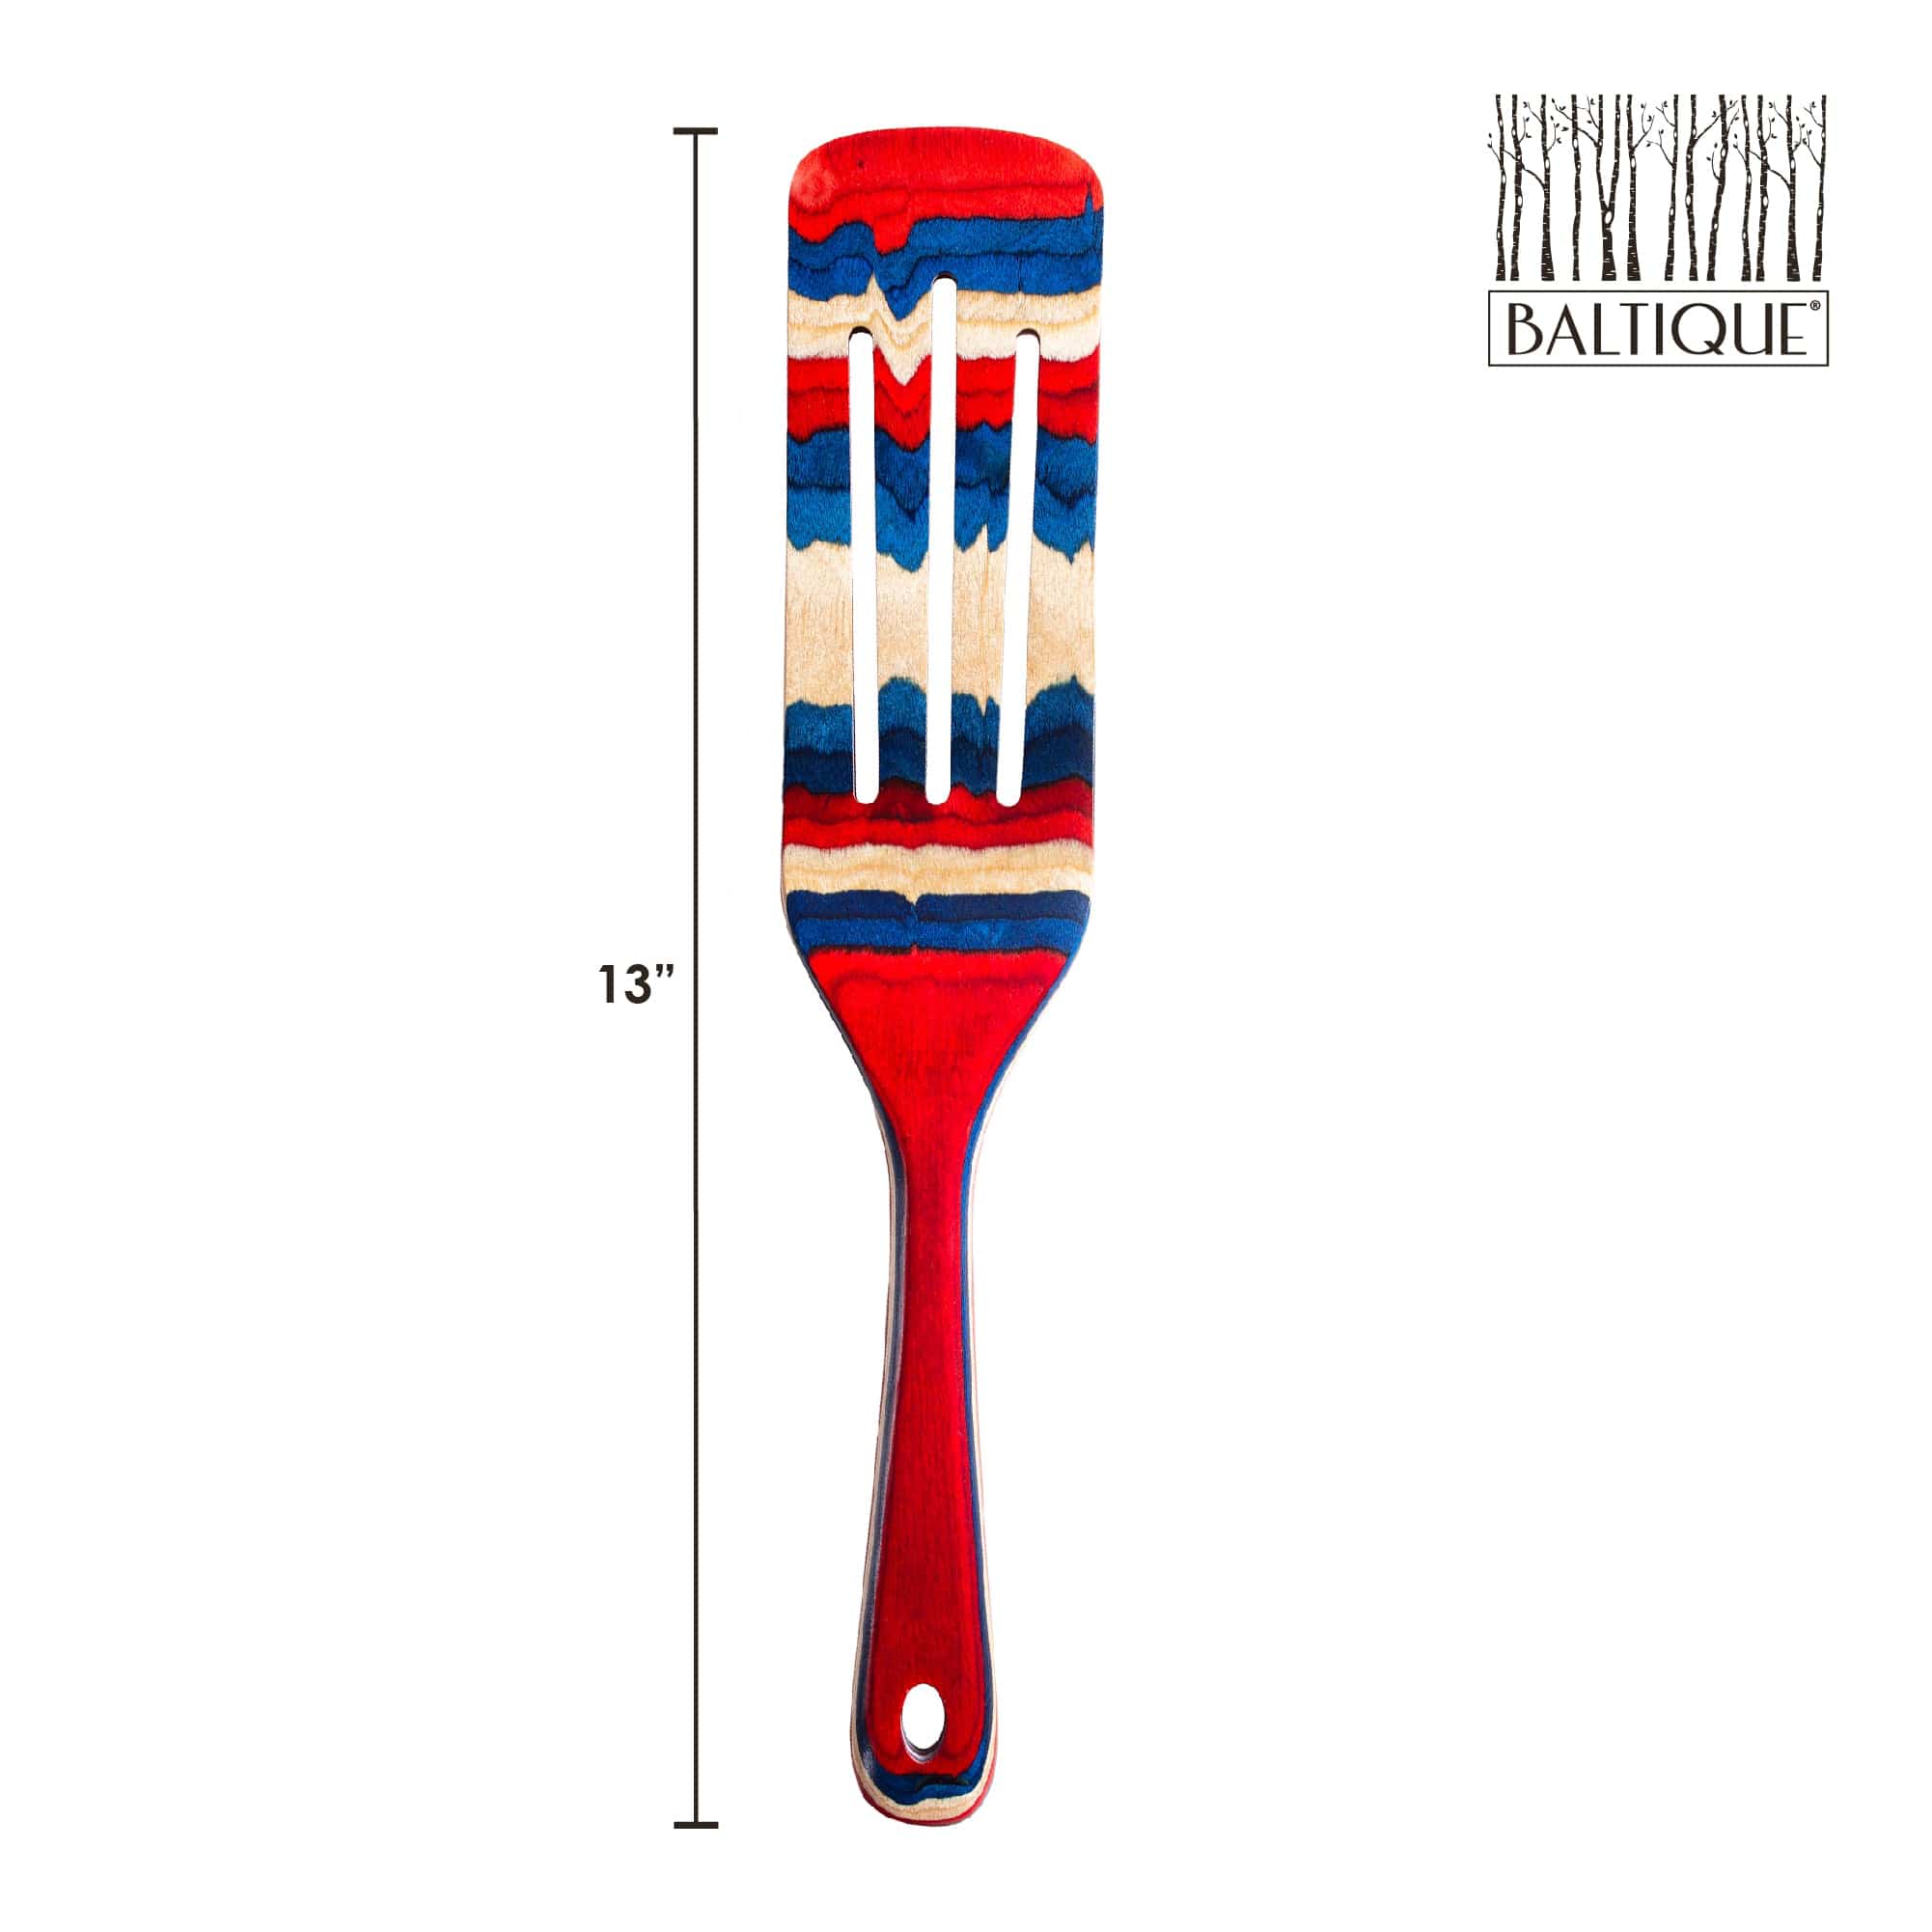 Baltique® Old Glory Collection Spurtle – Totally Bamboo